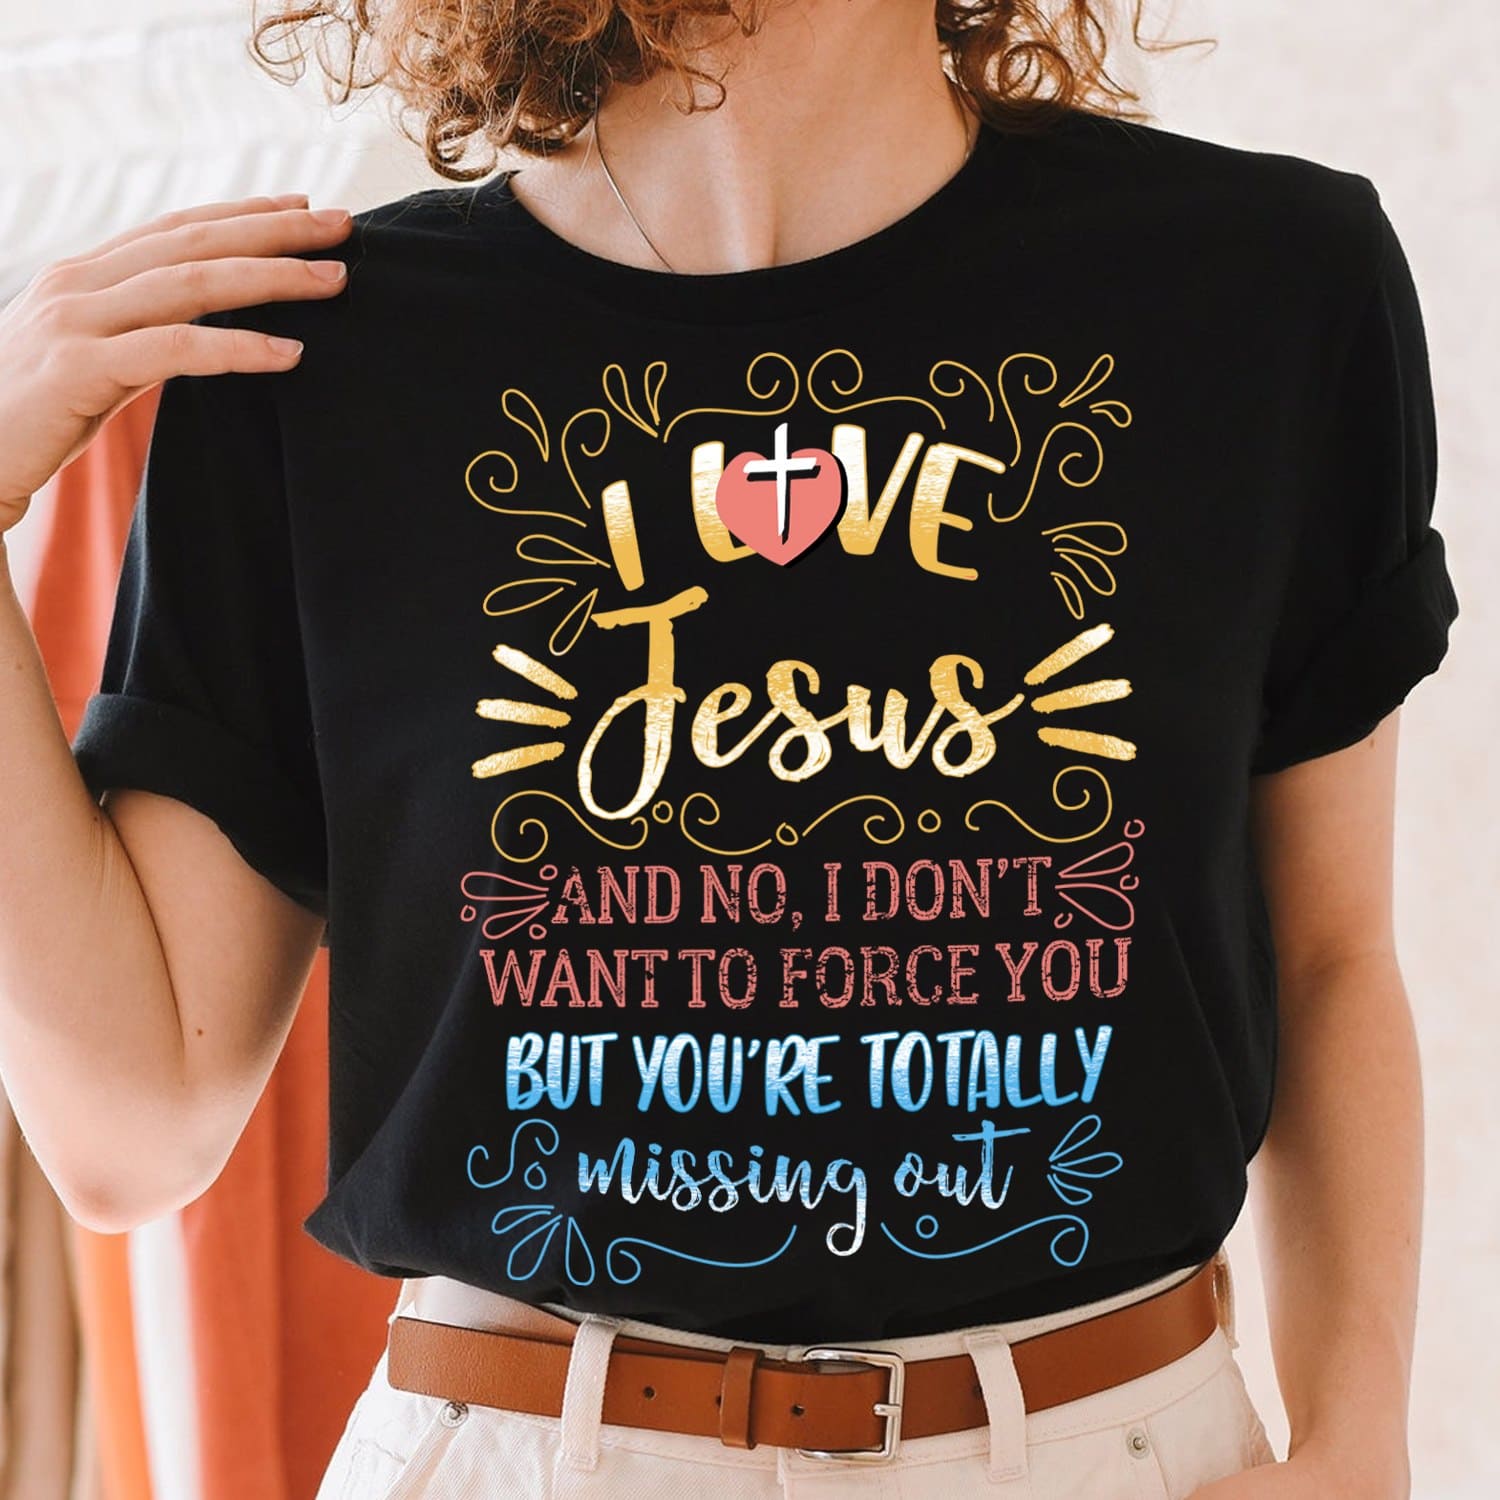 I love Jesus and no I don't want to force you but you're totally missing out - Believe in Jesus